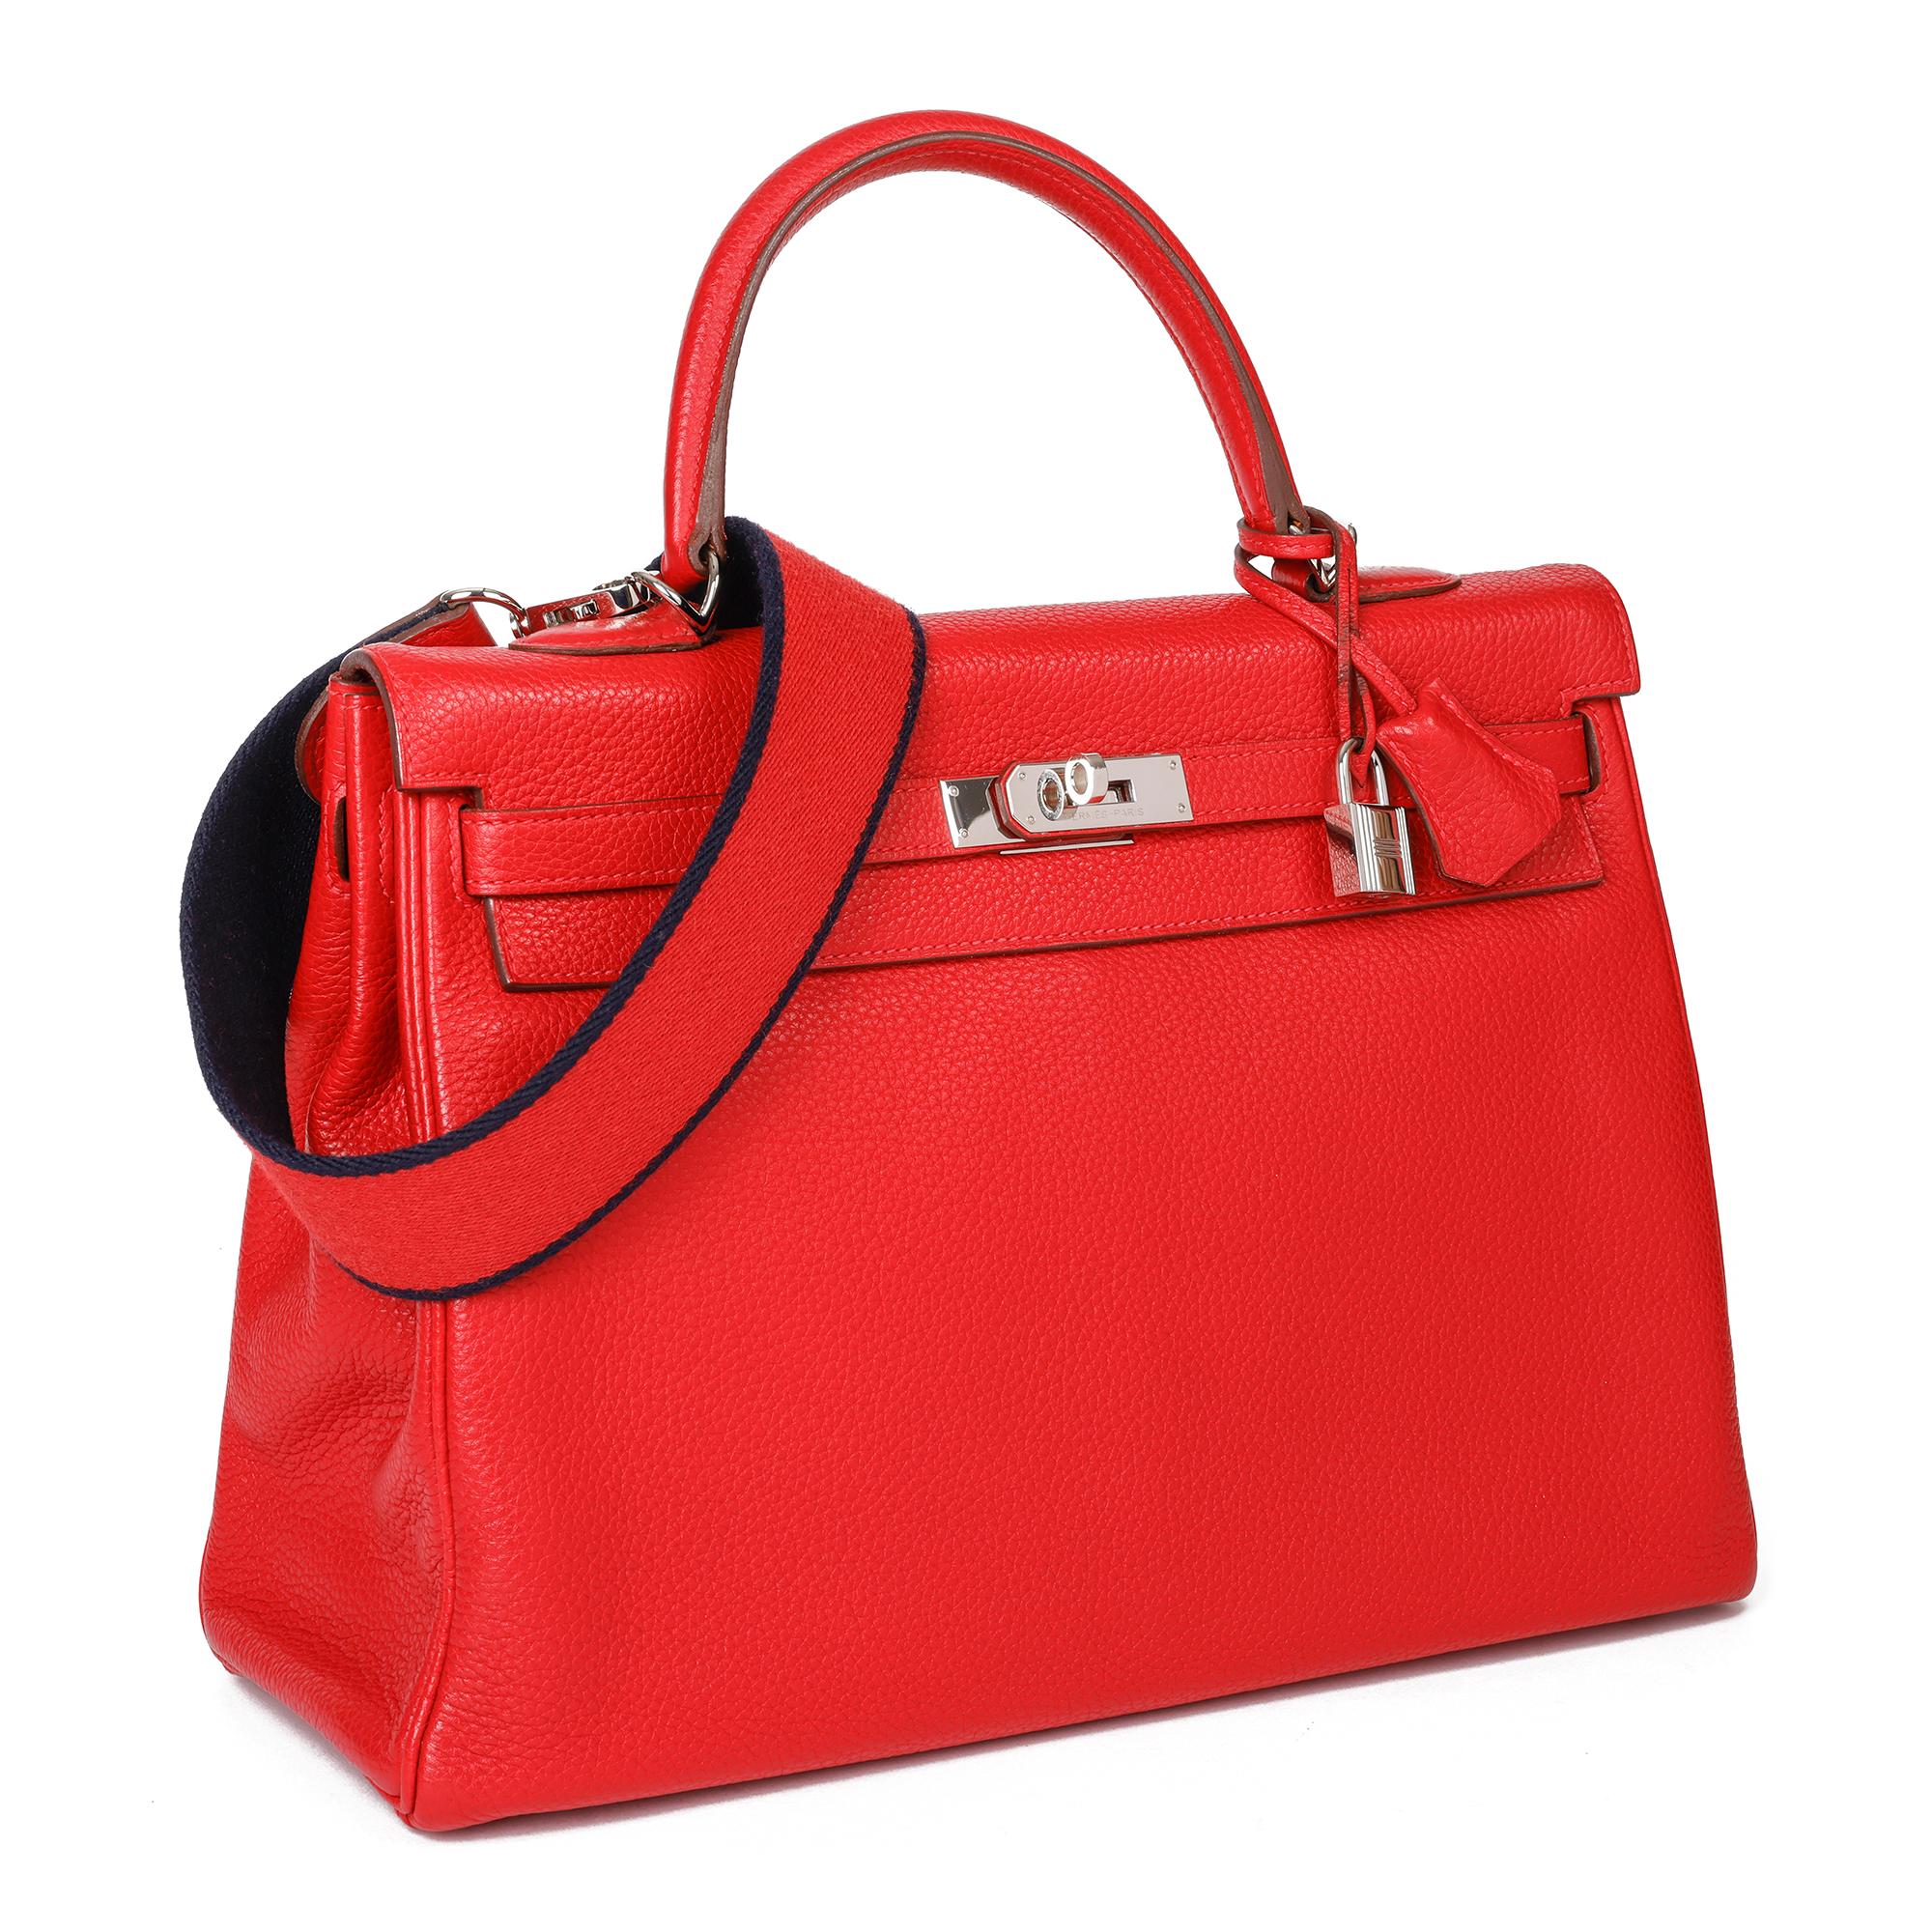 HERMÈS
Rouge Casaque Togo Leather Kelly 35cm 

Serial Number: [P]
Age (Circa): 2012
Accompanied By: Hermès Box, Dust Bag, Lock, Keys, Clochette, Shoulder Strap
Authenticity Details: Date Stamp (Made in France)
Gender: Ladies
Type: Top Handle,